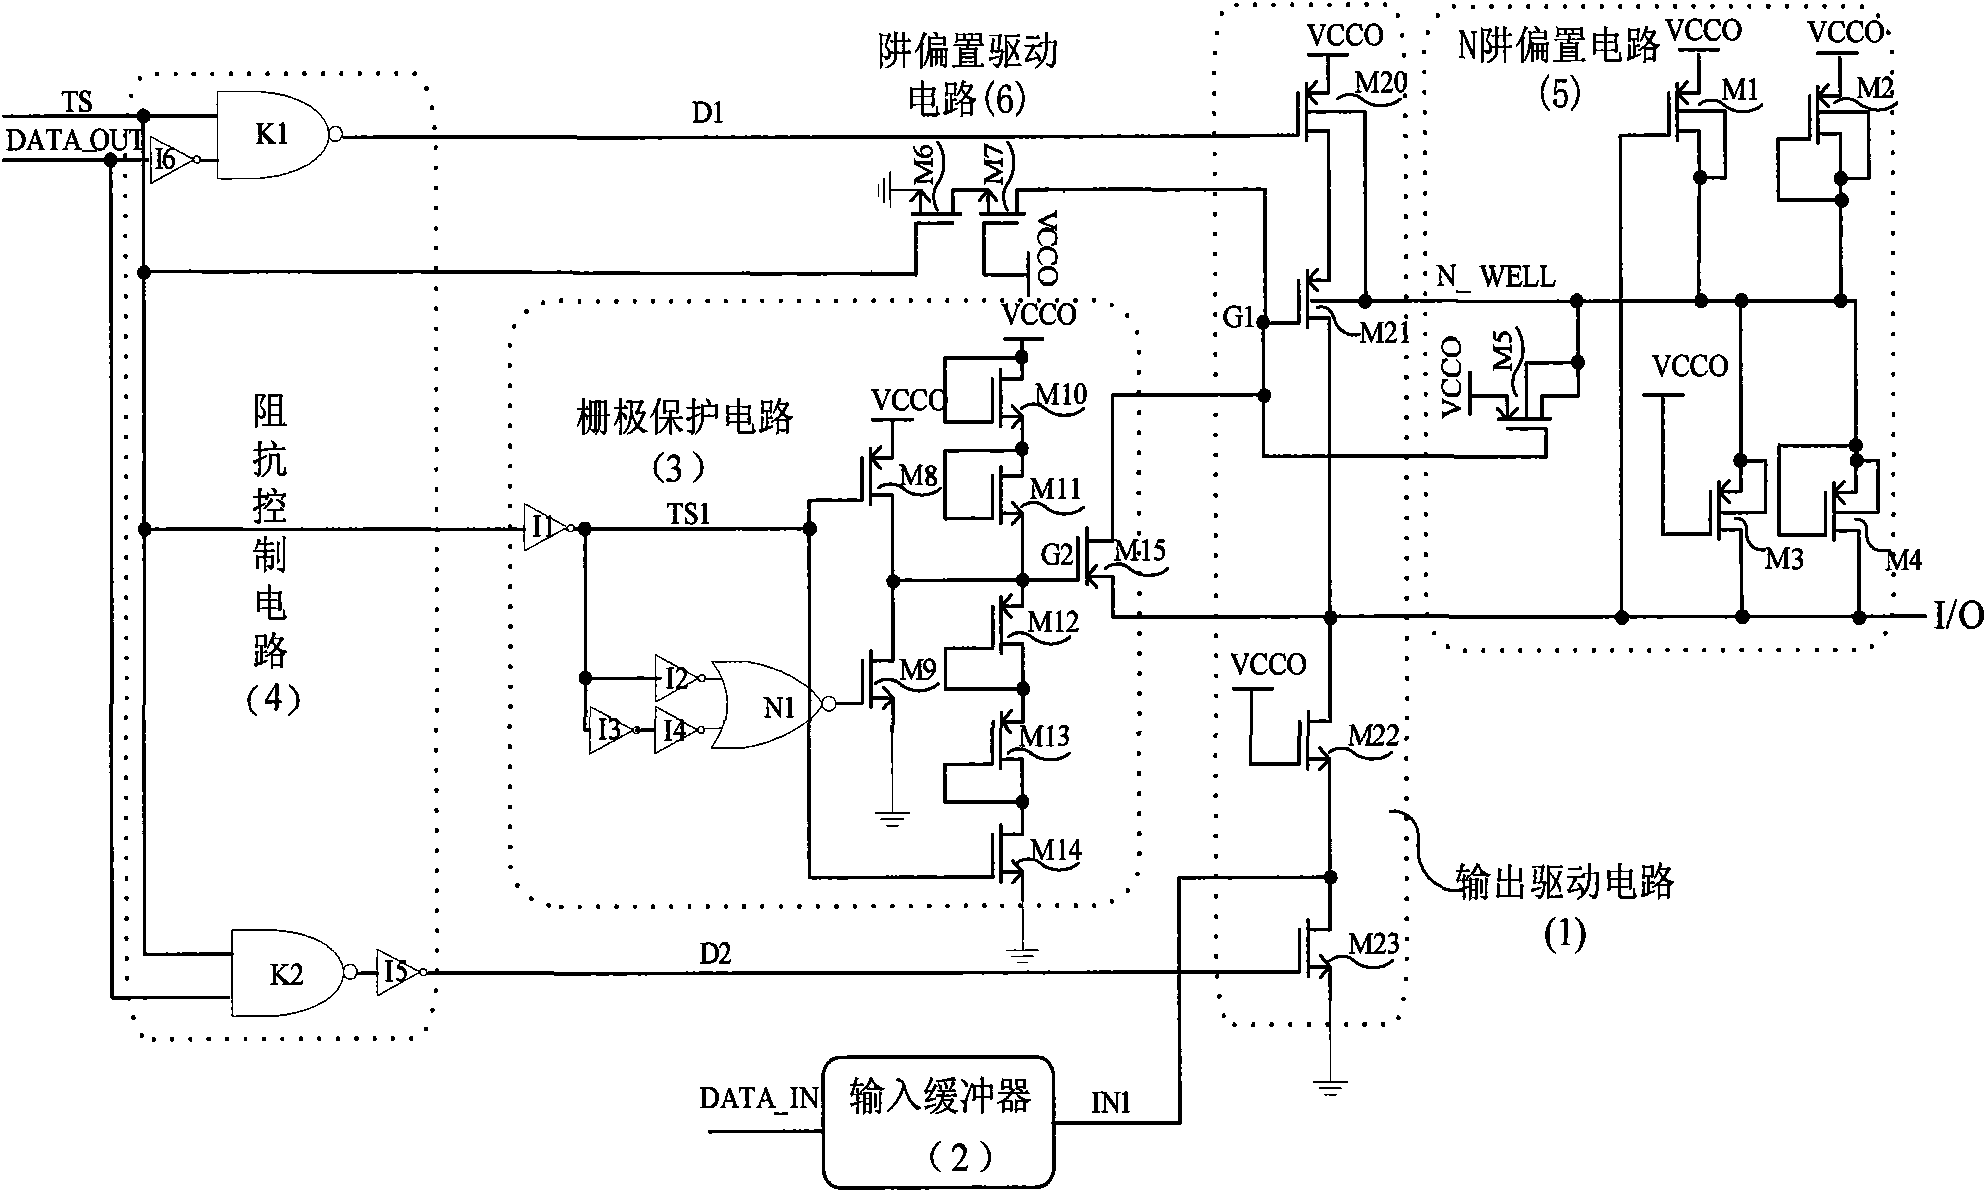 An interface circuit capable of tolerating high voltage input